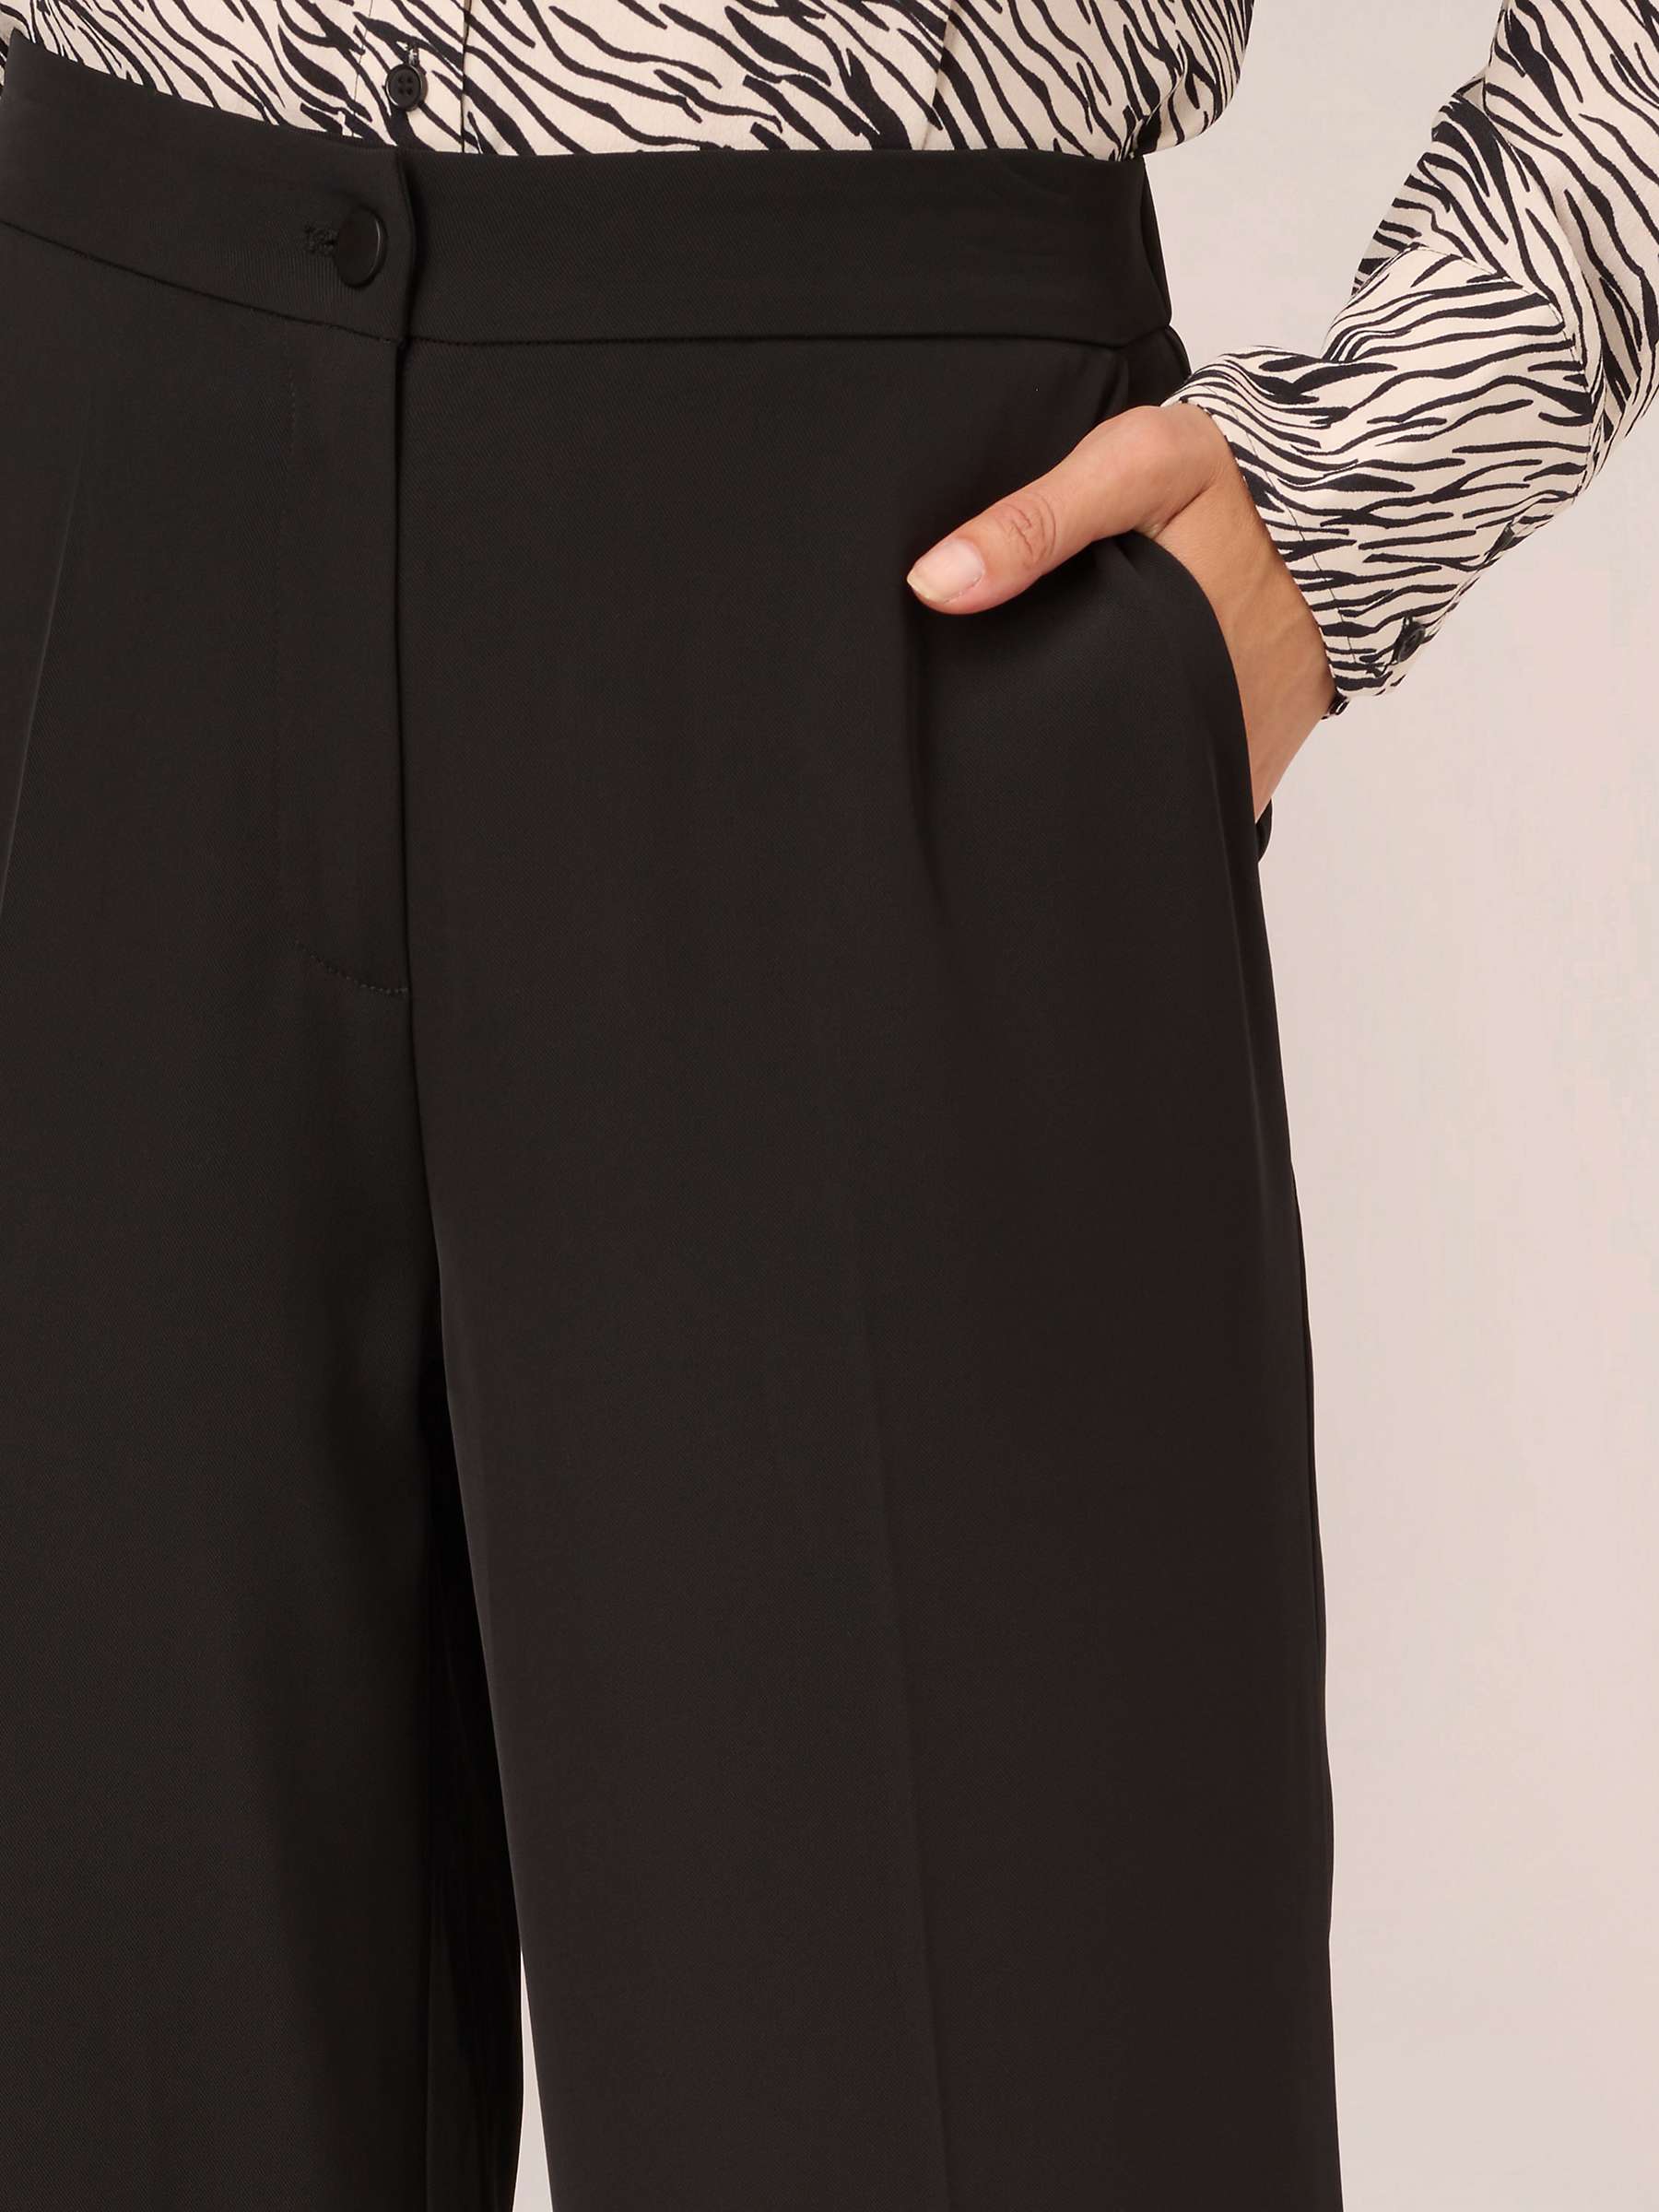 Buy Adrianna Papell Wide Leg Cropped Trousers, Black Online at johnlewis.com